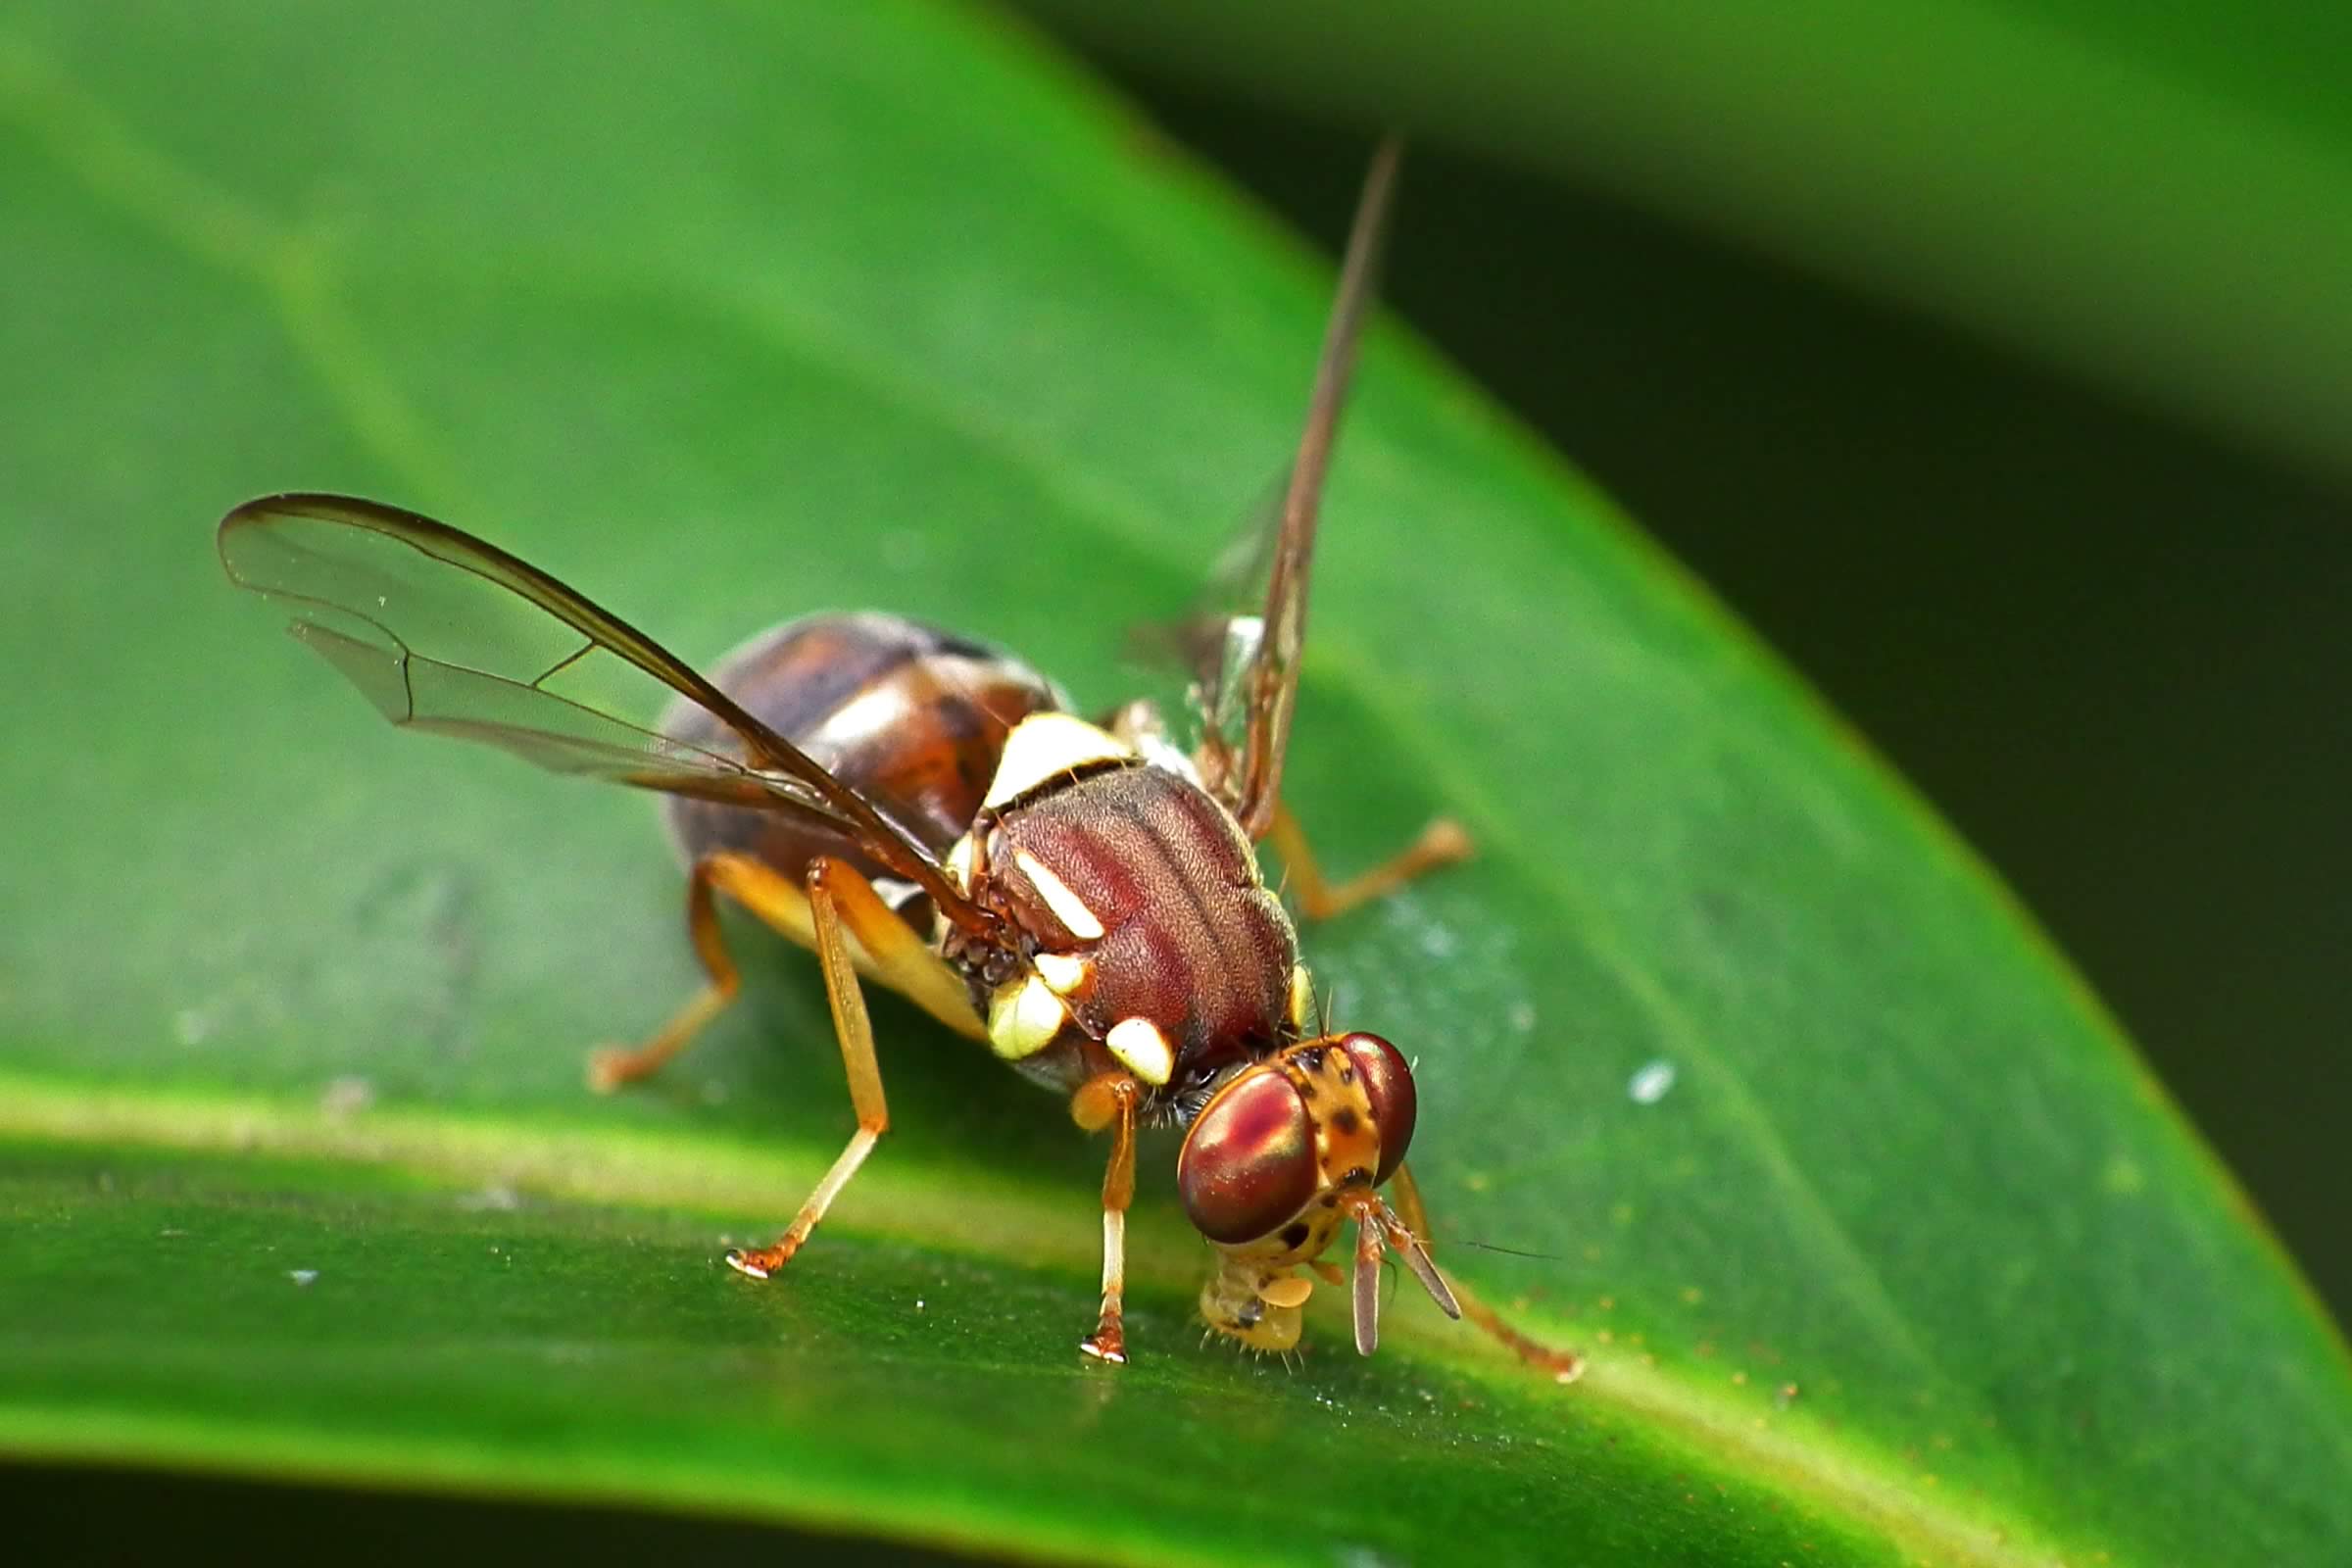 Queensland Fruit Fly – Bactrocera tryoni